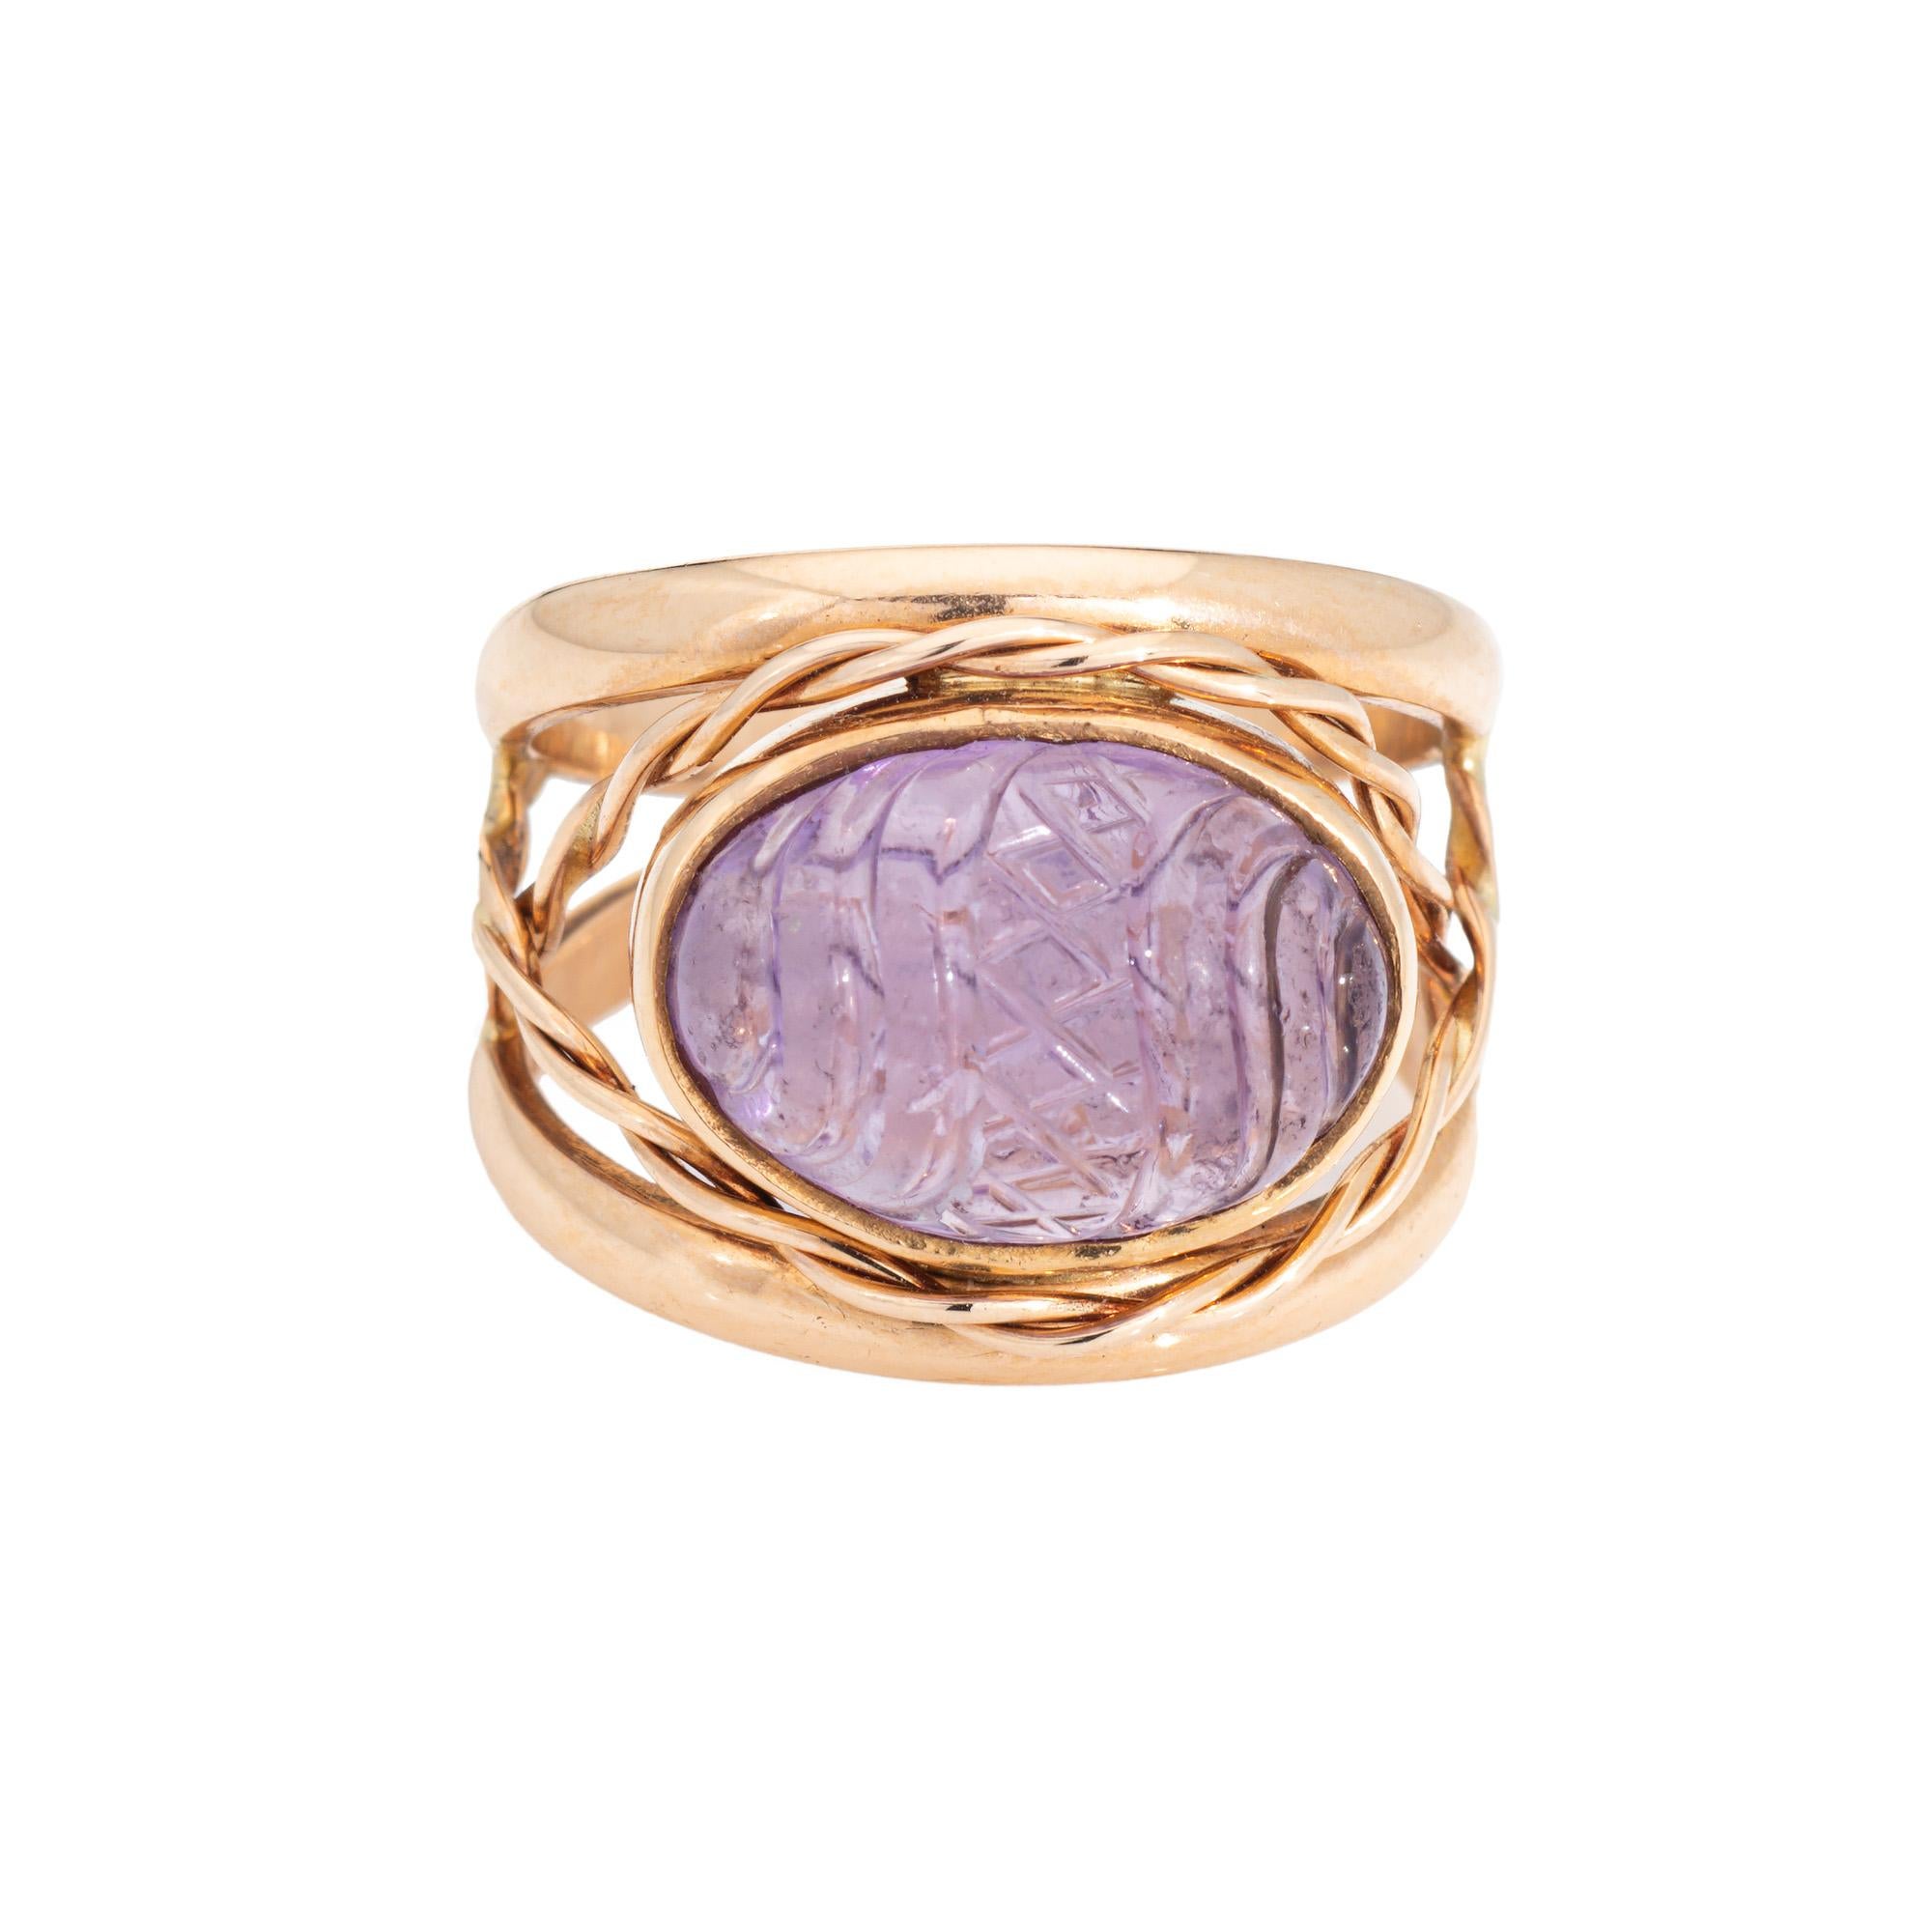 Stylish vintage carved amethyst cocktail ring crafted in 14 karat yellow gold. 

Carved amethyst measures 13.5mm x 9mm (note: light surface abrasions to the amethyst). 

The amethyst is carved with a scrolled design and diamond pattern to the